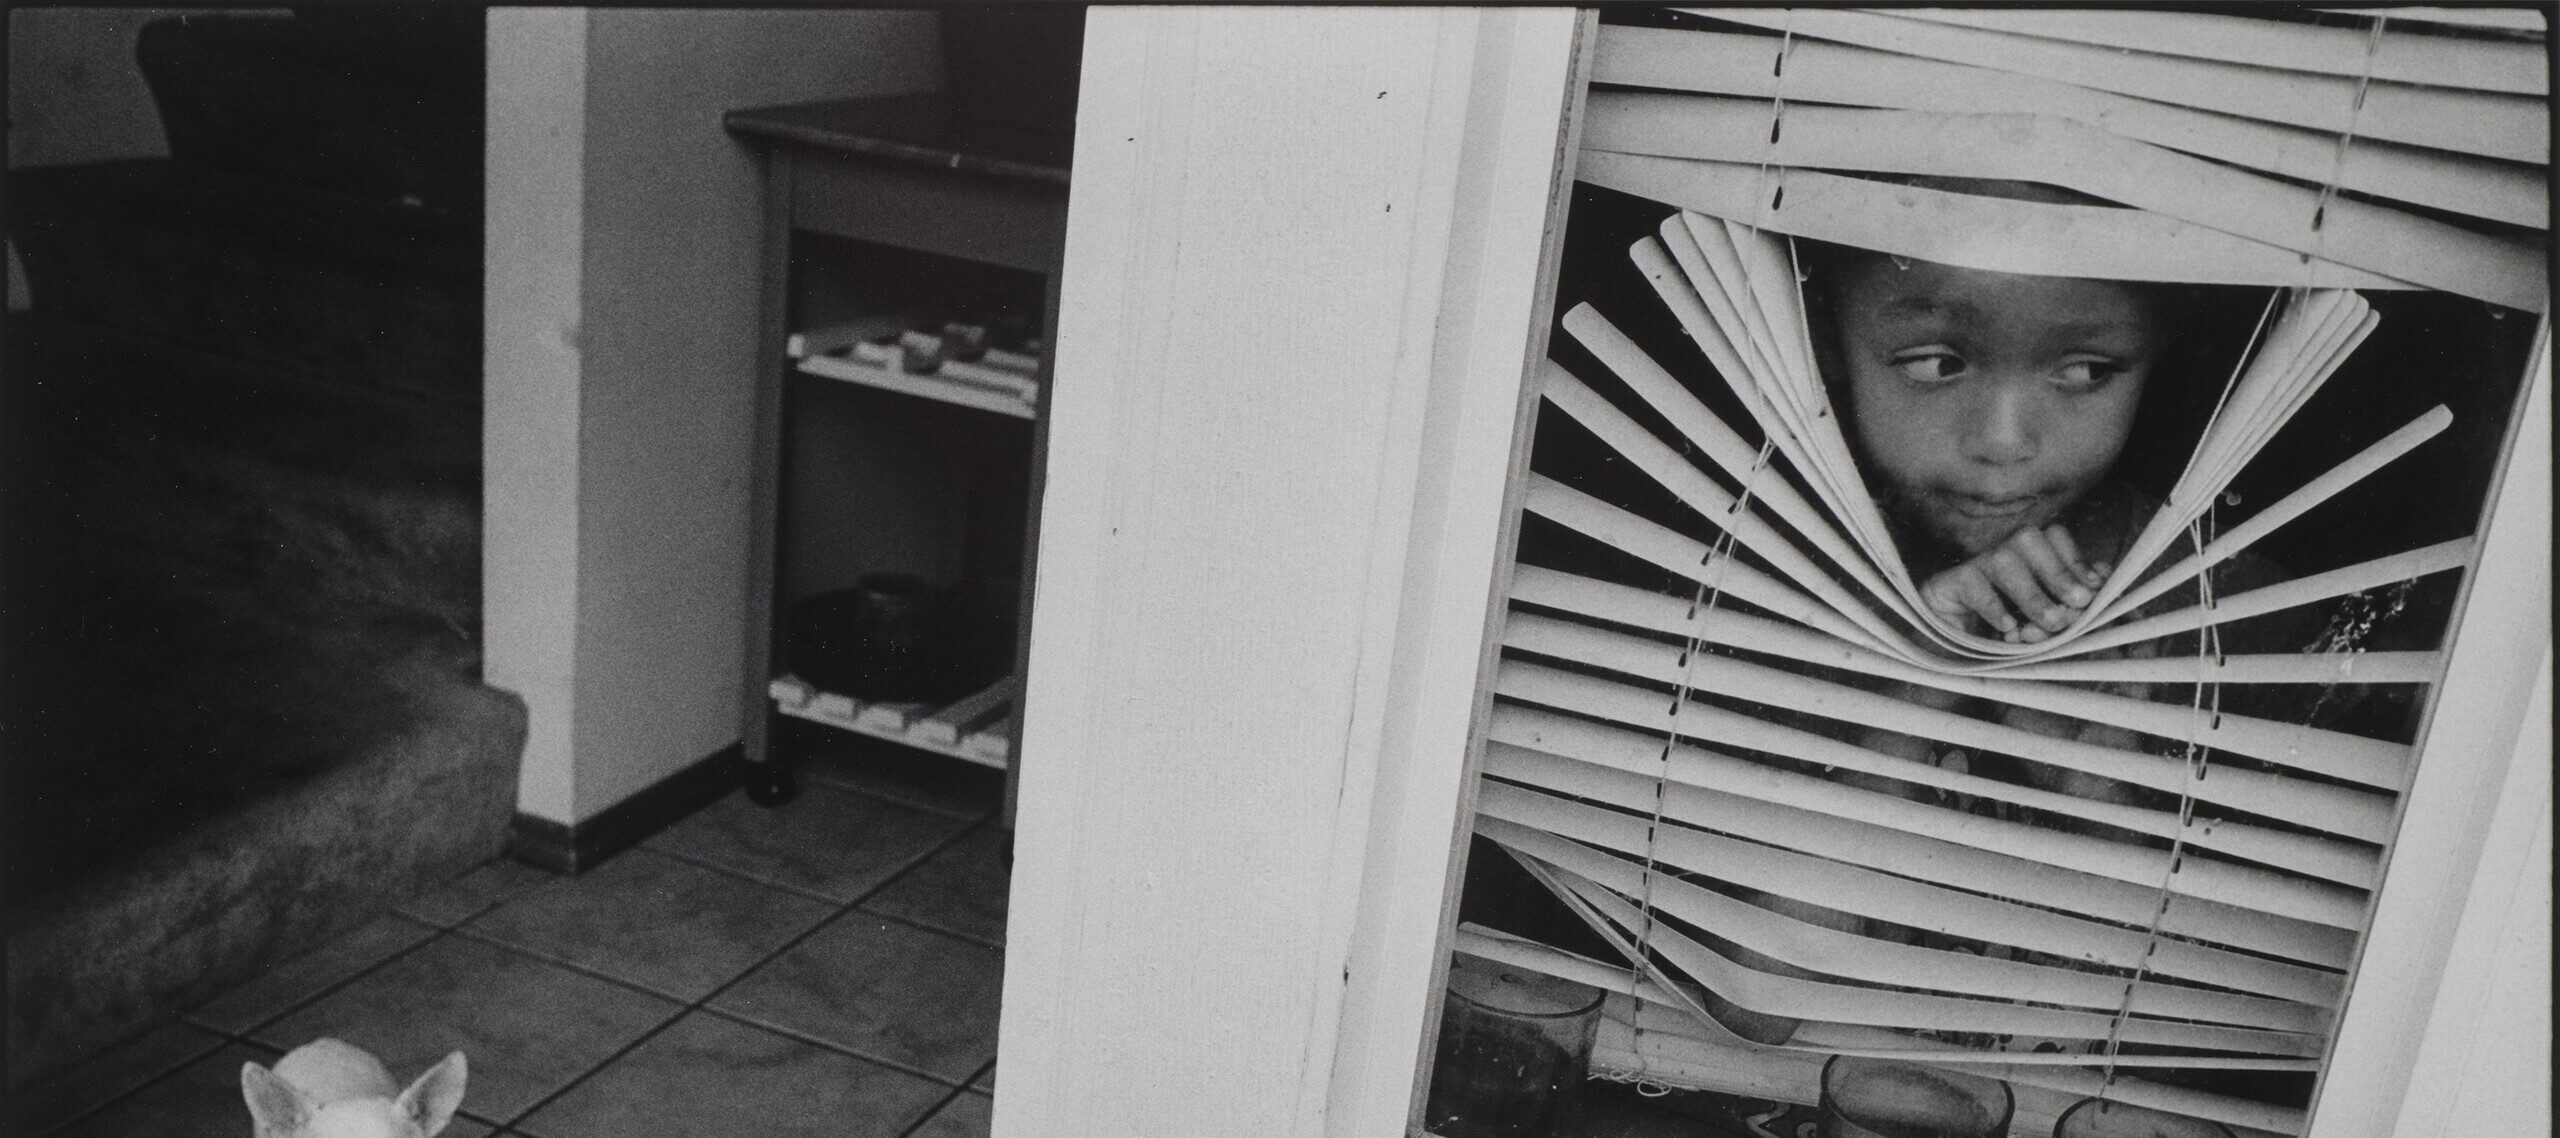 A black-and-white photograph of a young, medium-dark skinned girl peeking out between white blinds in a window that she bends and holds open with one hand. To the left of the window is an open doorframe to a tiled room where a little white dog stands.